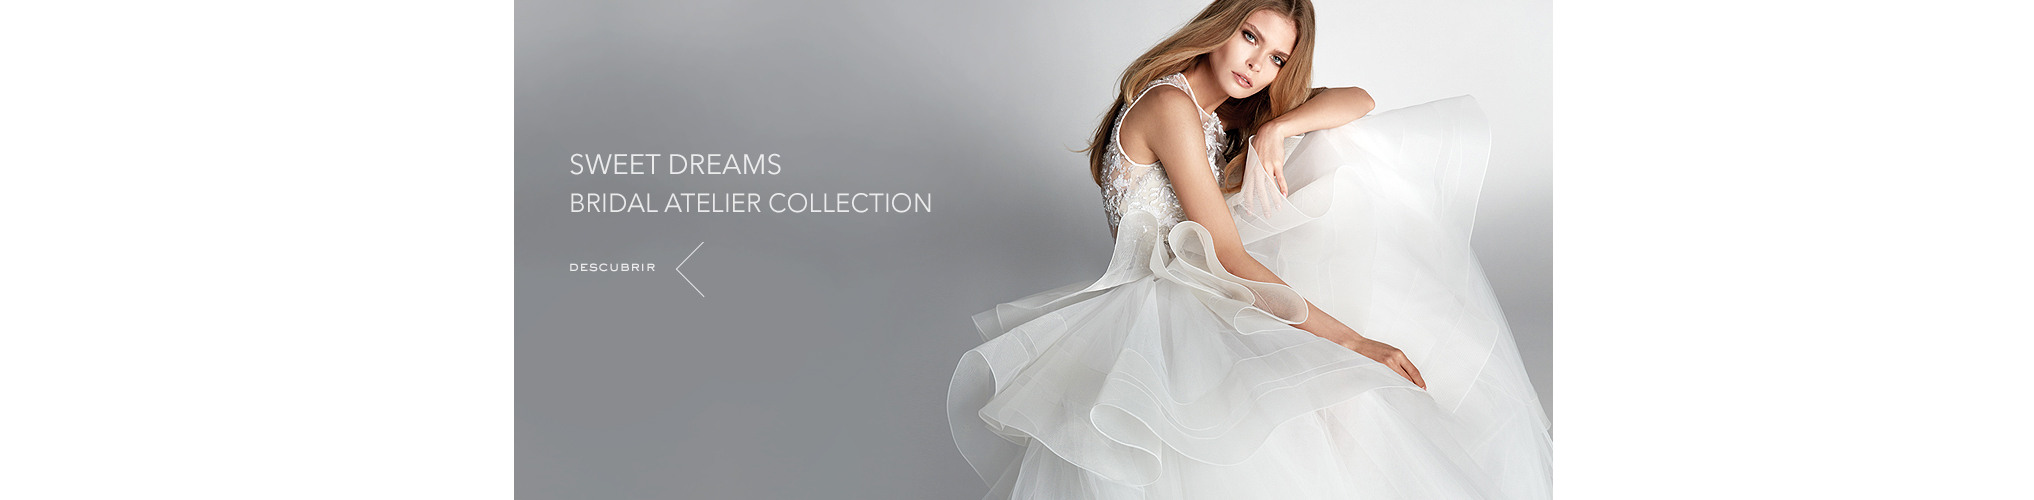 SWEET DREAMS / ATELIER BRIDAL COLLECTION